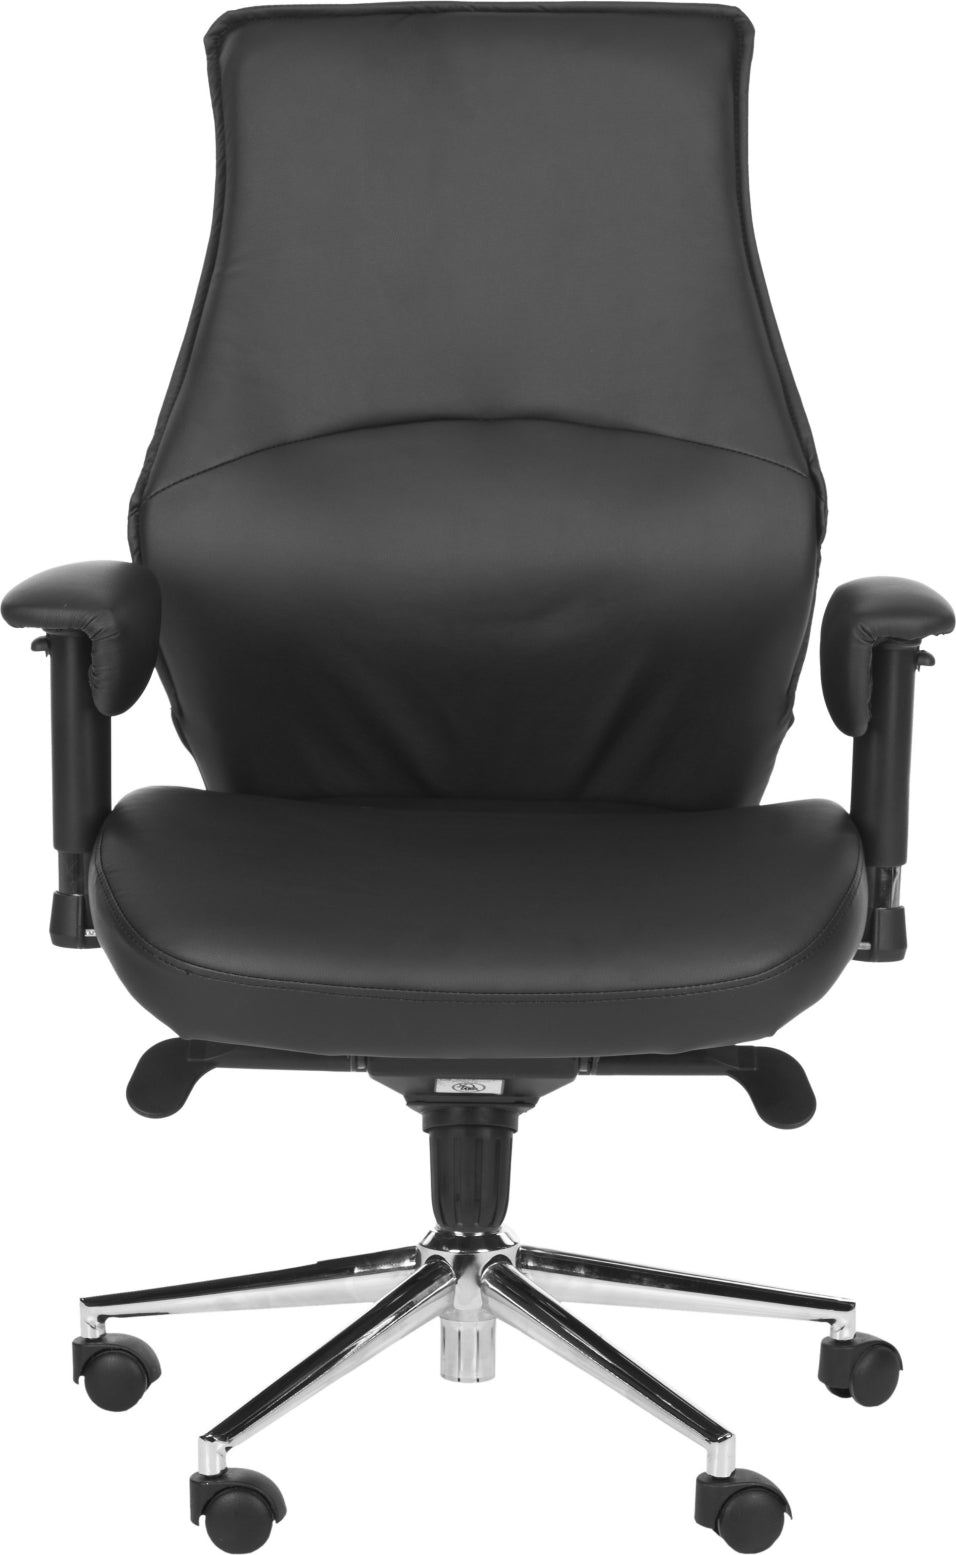 Safavieh Irving Desk Chair Black and Silver Furniture main image